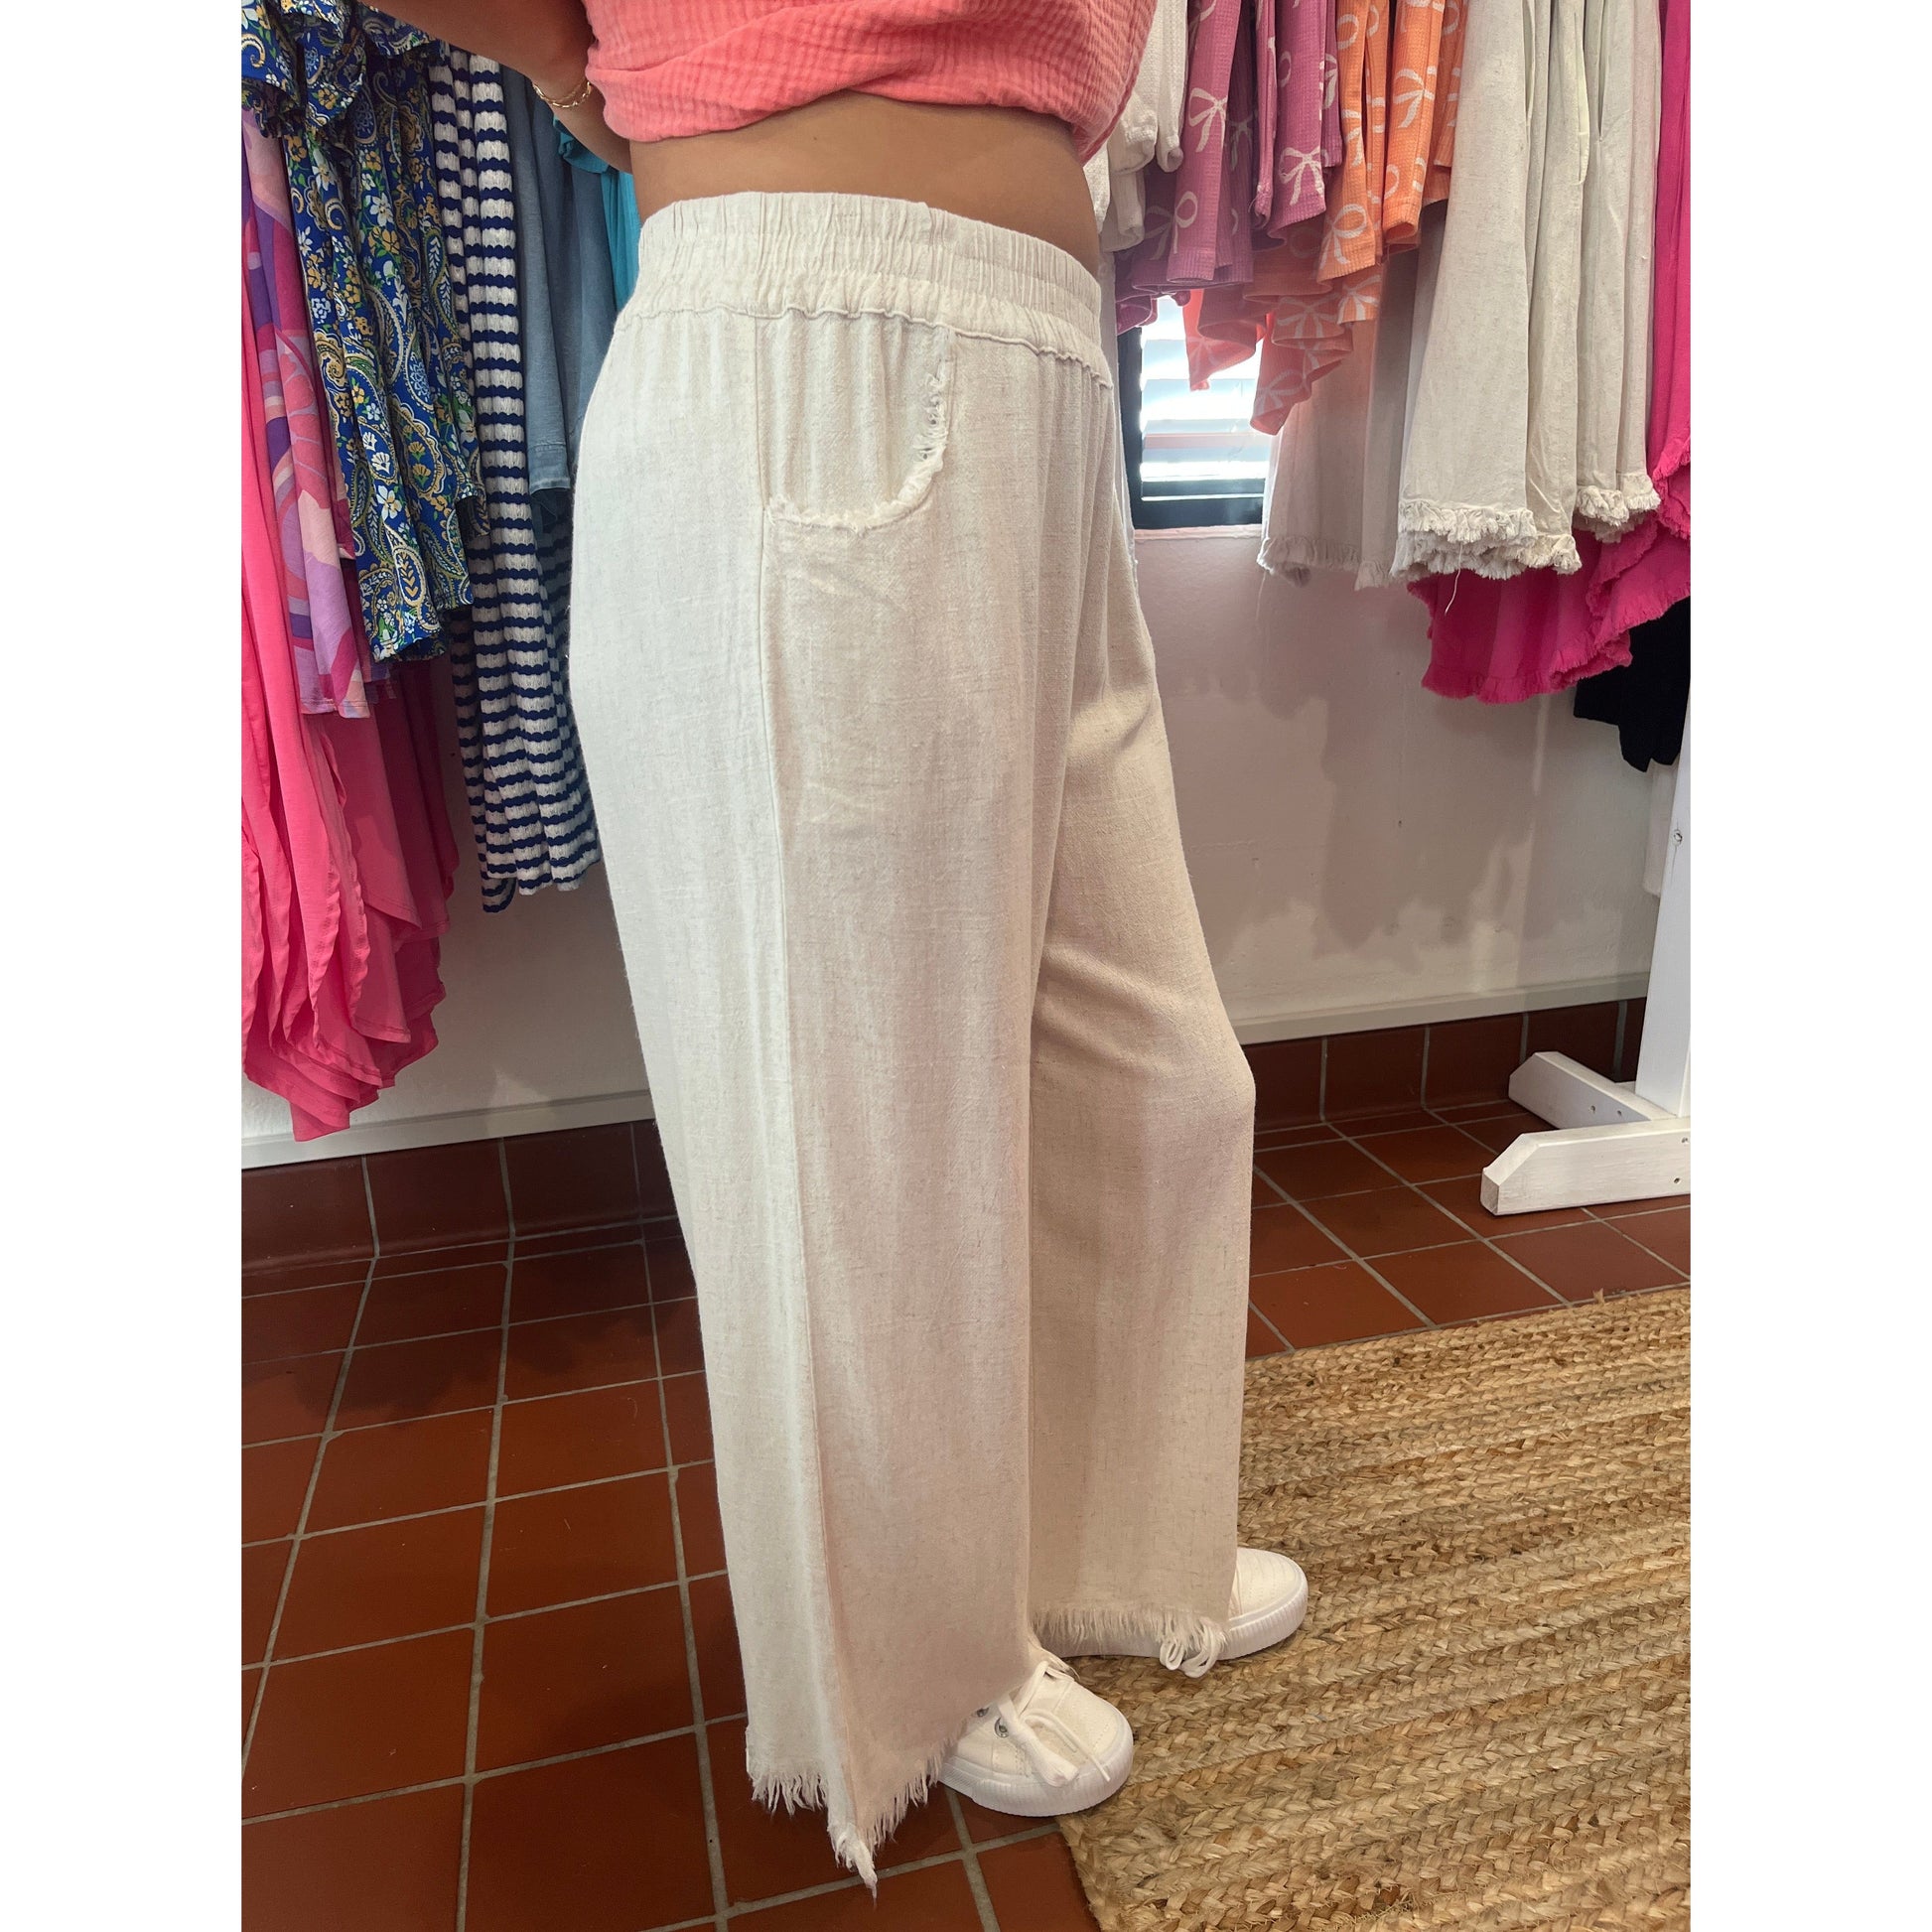 Wide leg pants with fray hems. Brand: Umgee. Available in sizes Small through Large. 55% Linen, 45% Cotton. Oatmeal